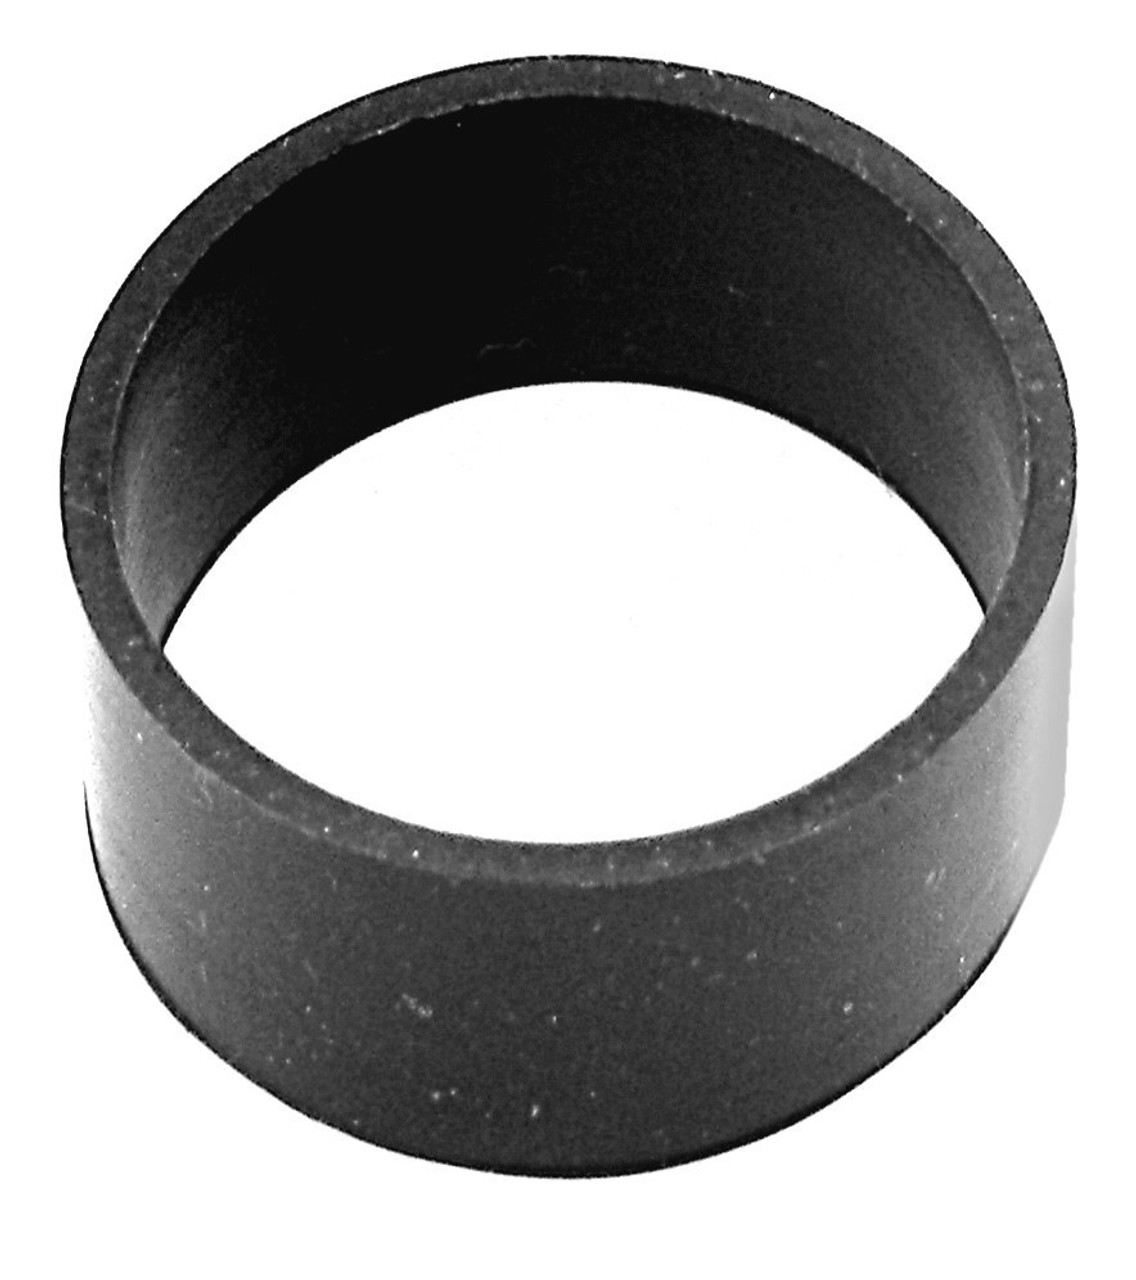 Go Cruise New Throttle Control Rubber Ring, 71-9155